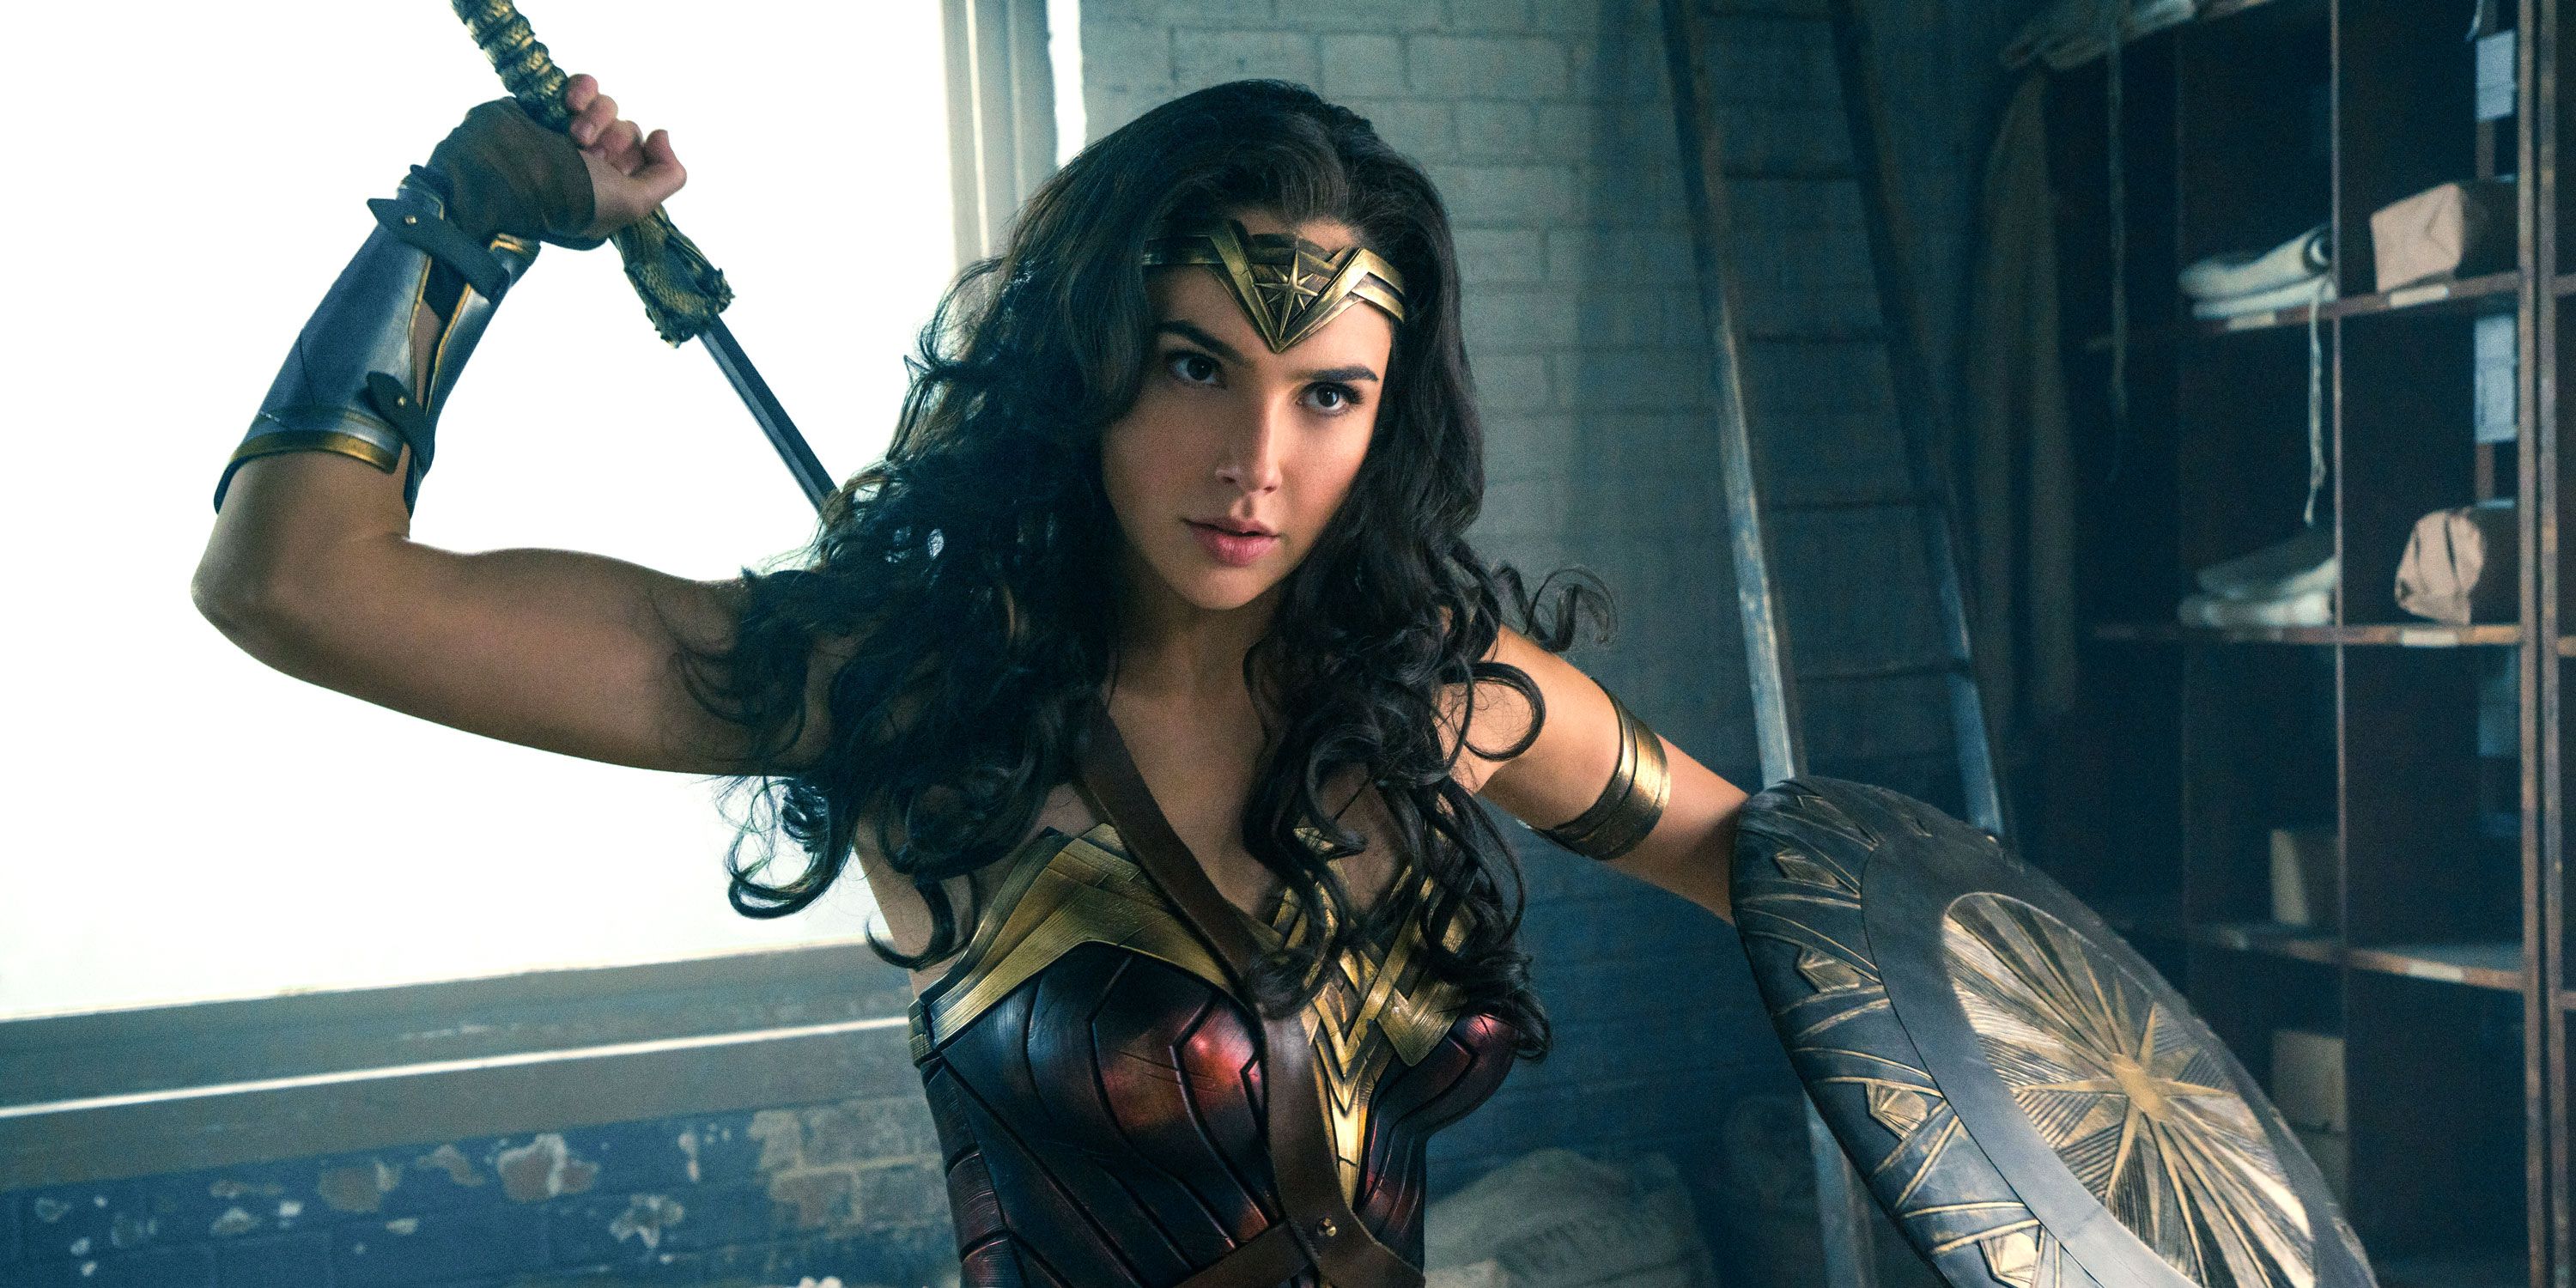 Can 'Wonder Woman' break through the Best Picture glass ceiling